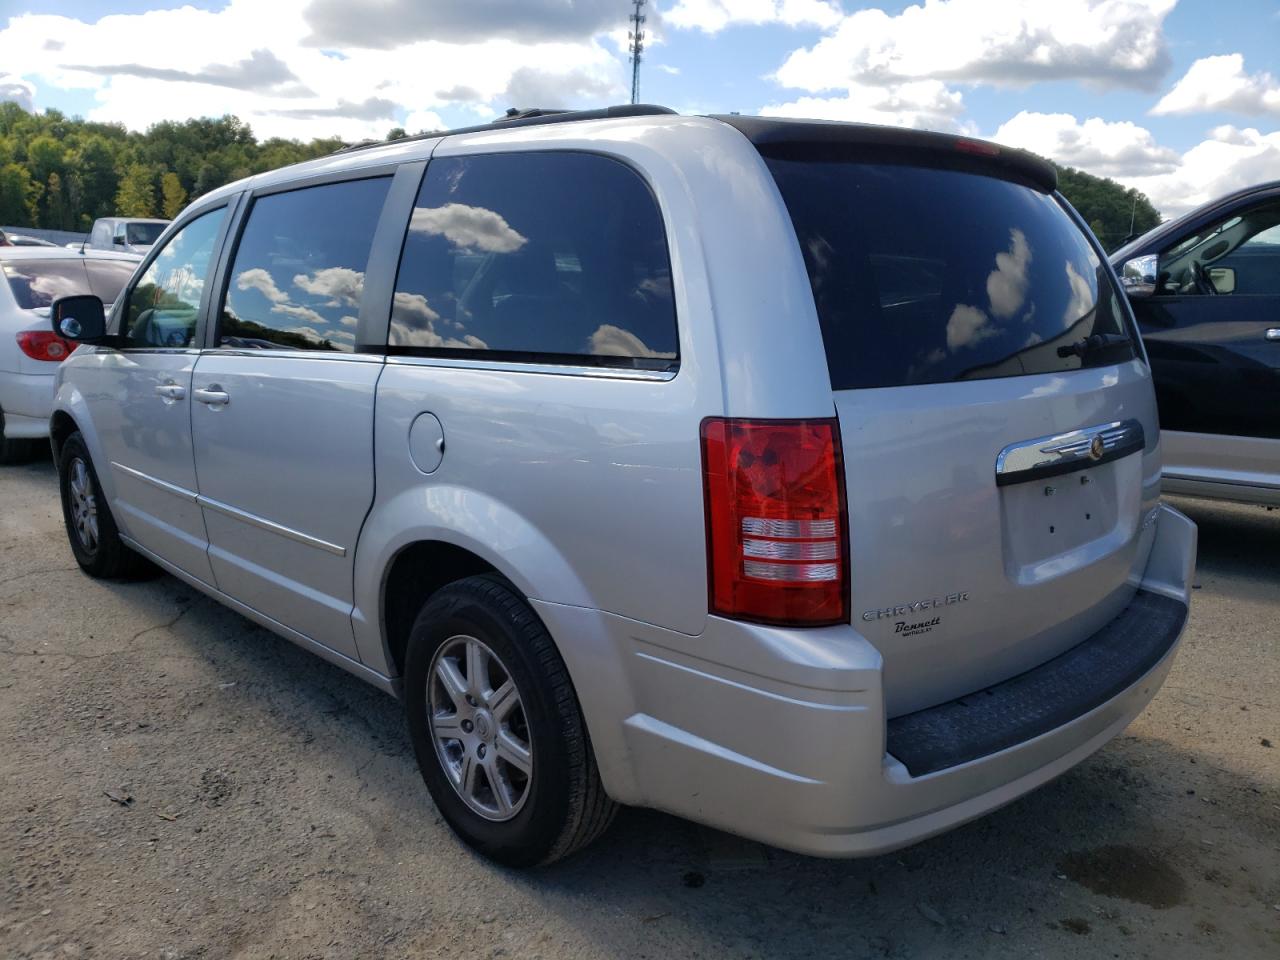 2010 CHRYSLER TOWN & COUNTRY TOURING VIN: 2A4RR5D13AR461367